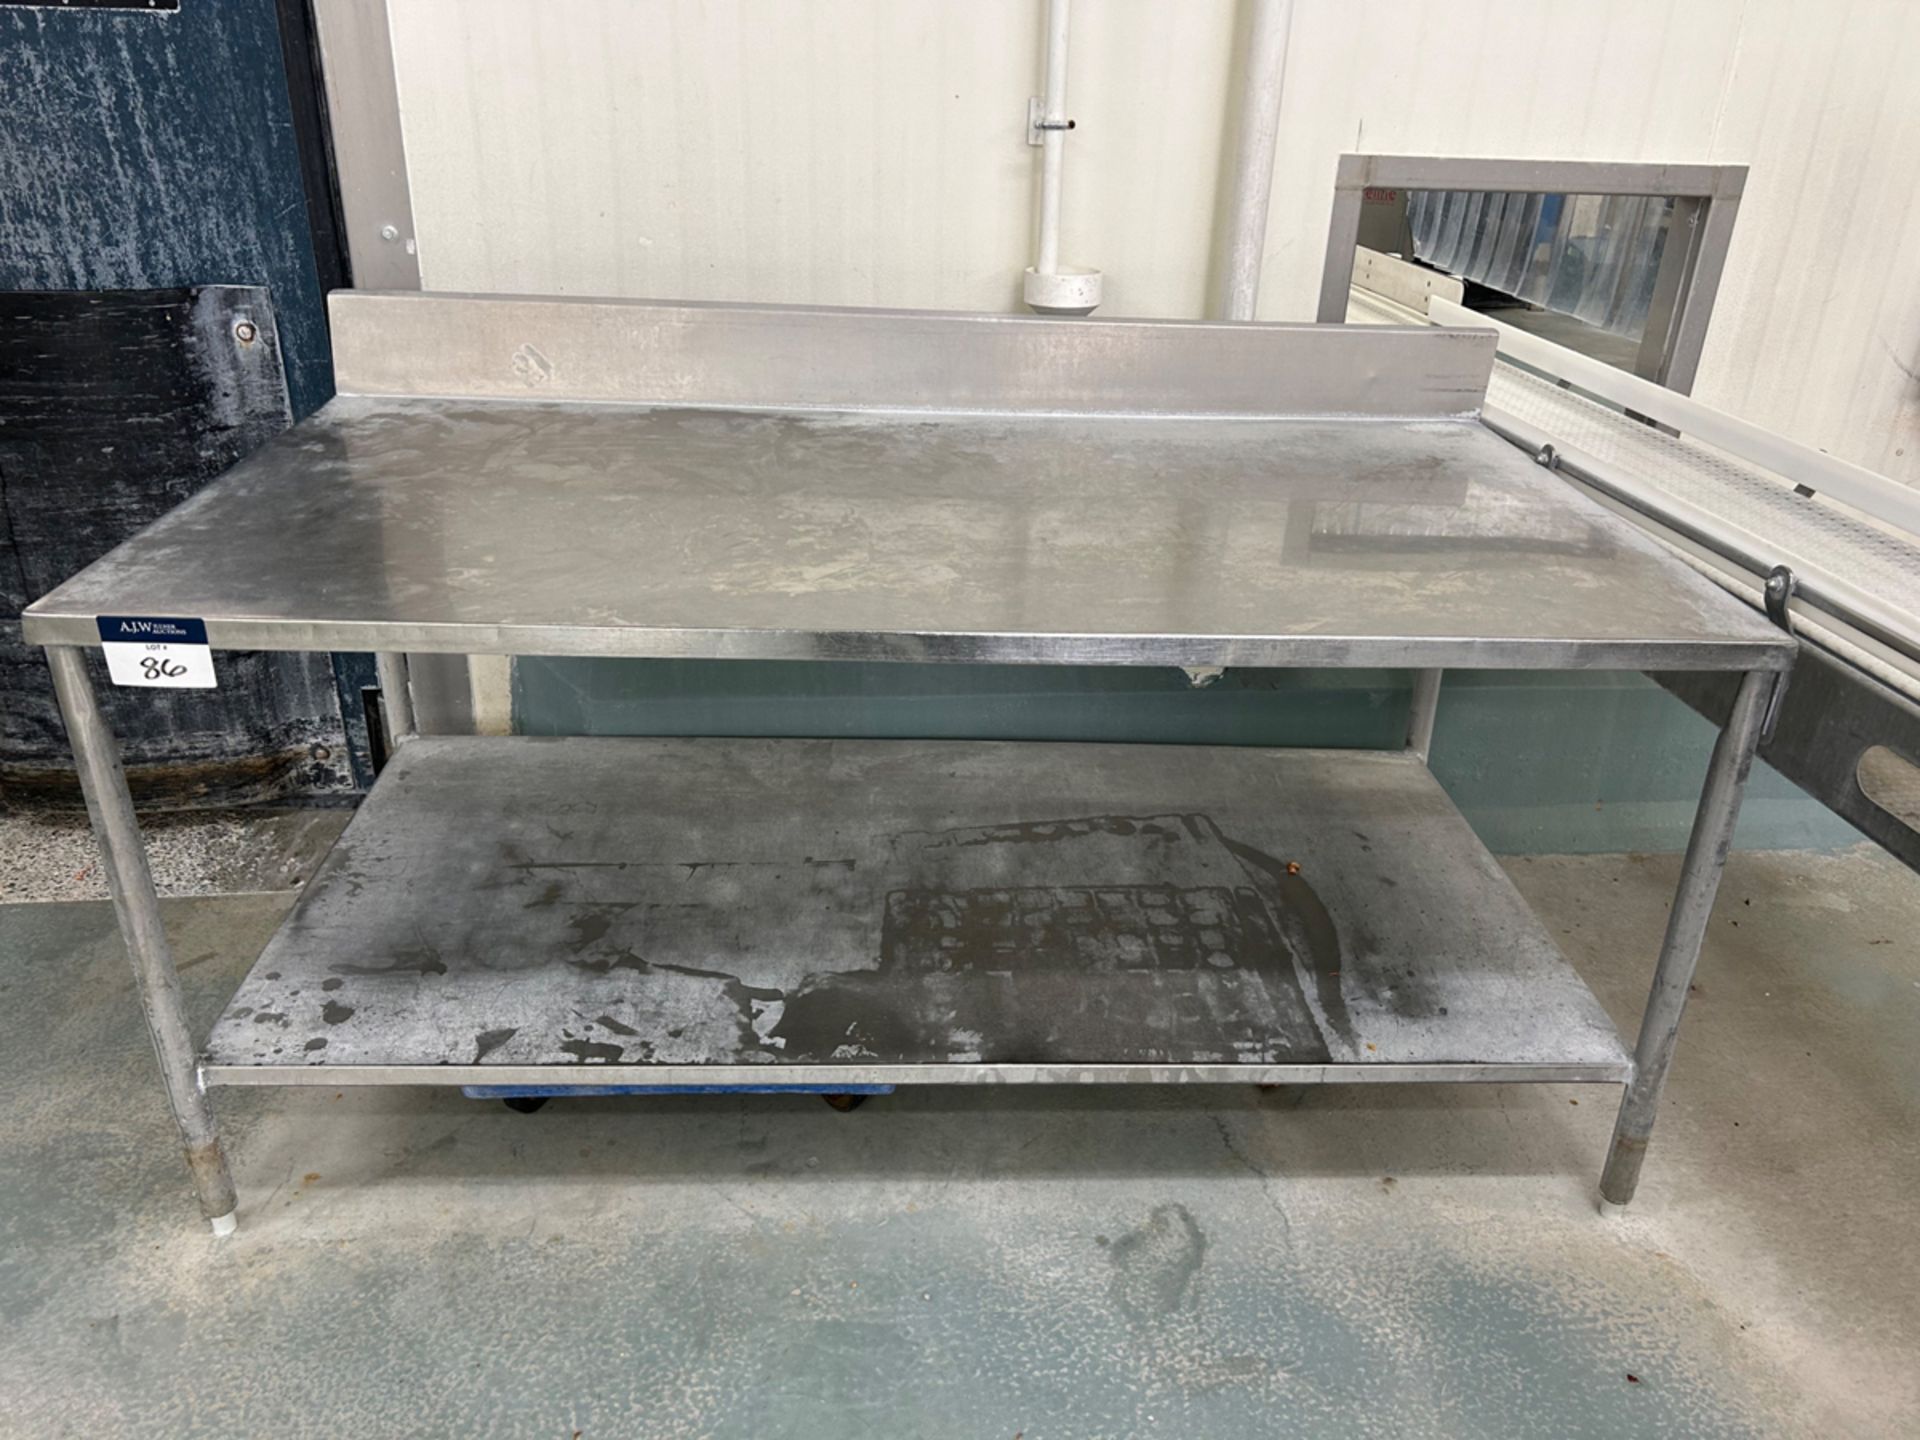 2-Tier Stainless Steel Table - Image 2 of 2